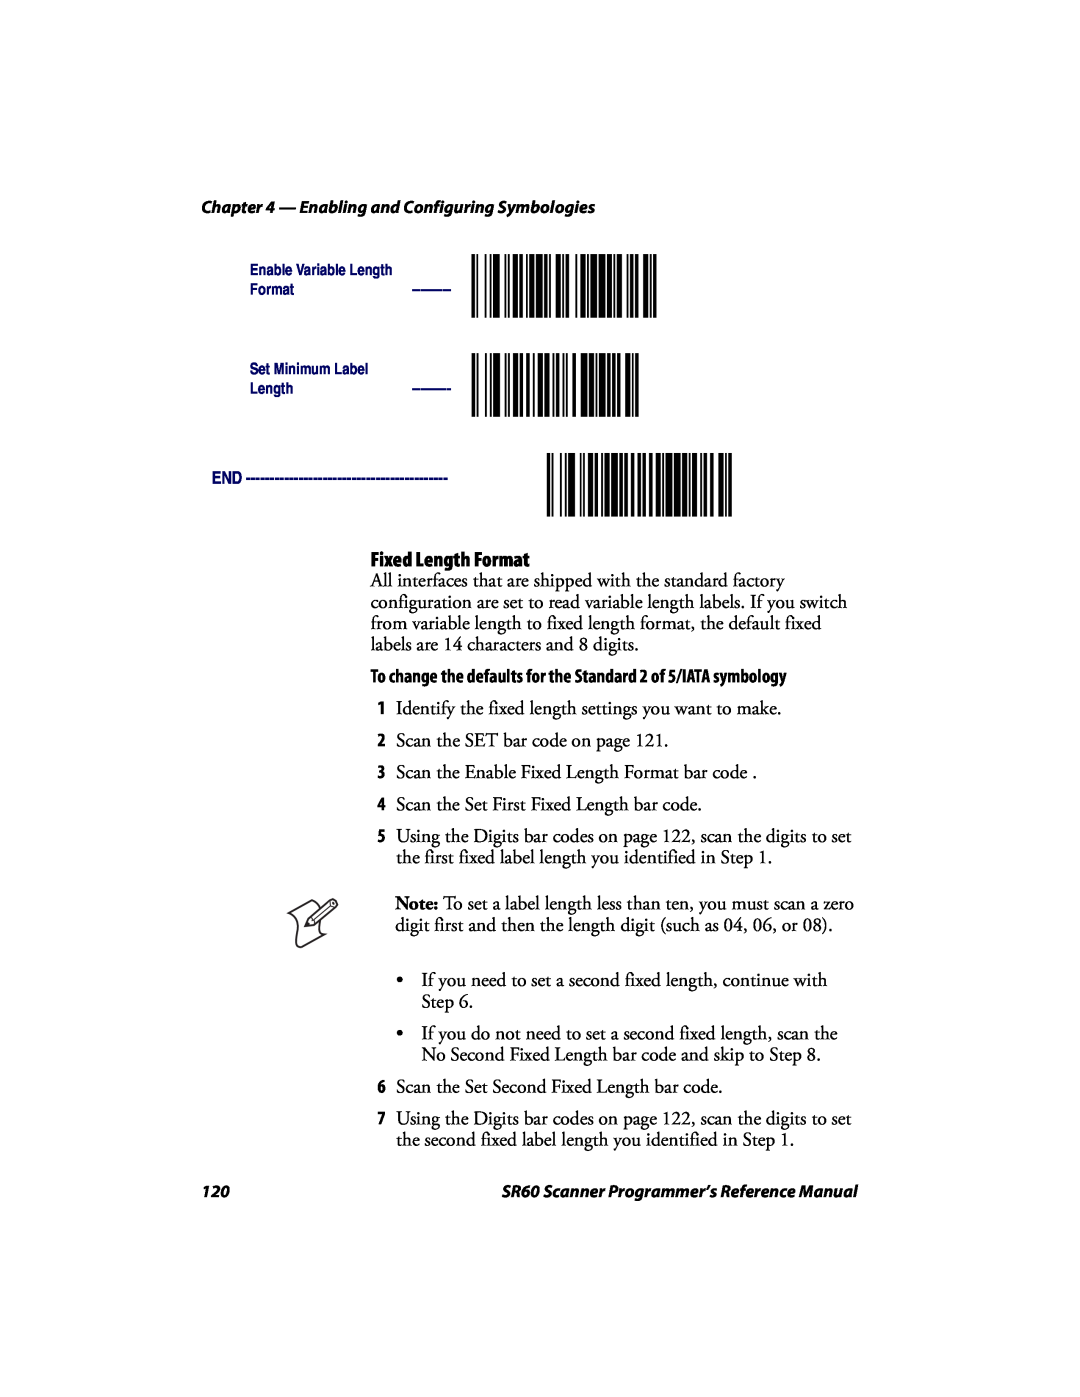 Intermec SR60 manual To change the defaults for the Standard 2 of 5/IATA symbology, Fixed Length Format 